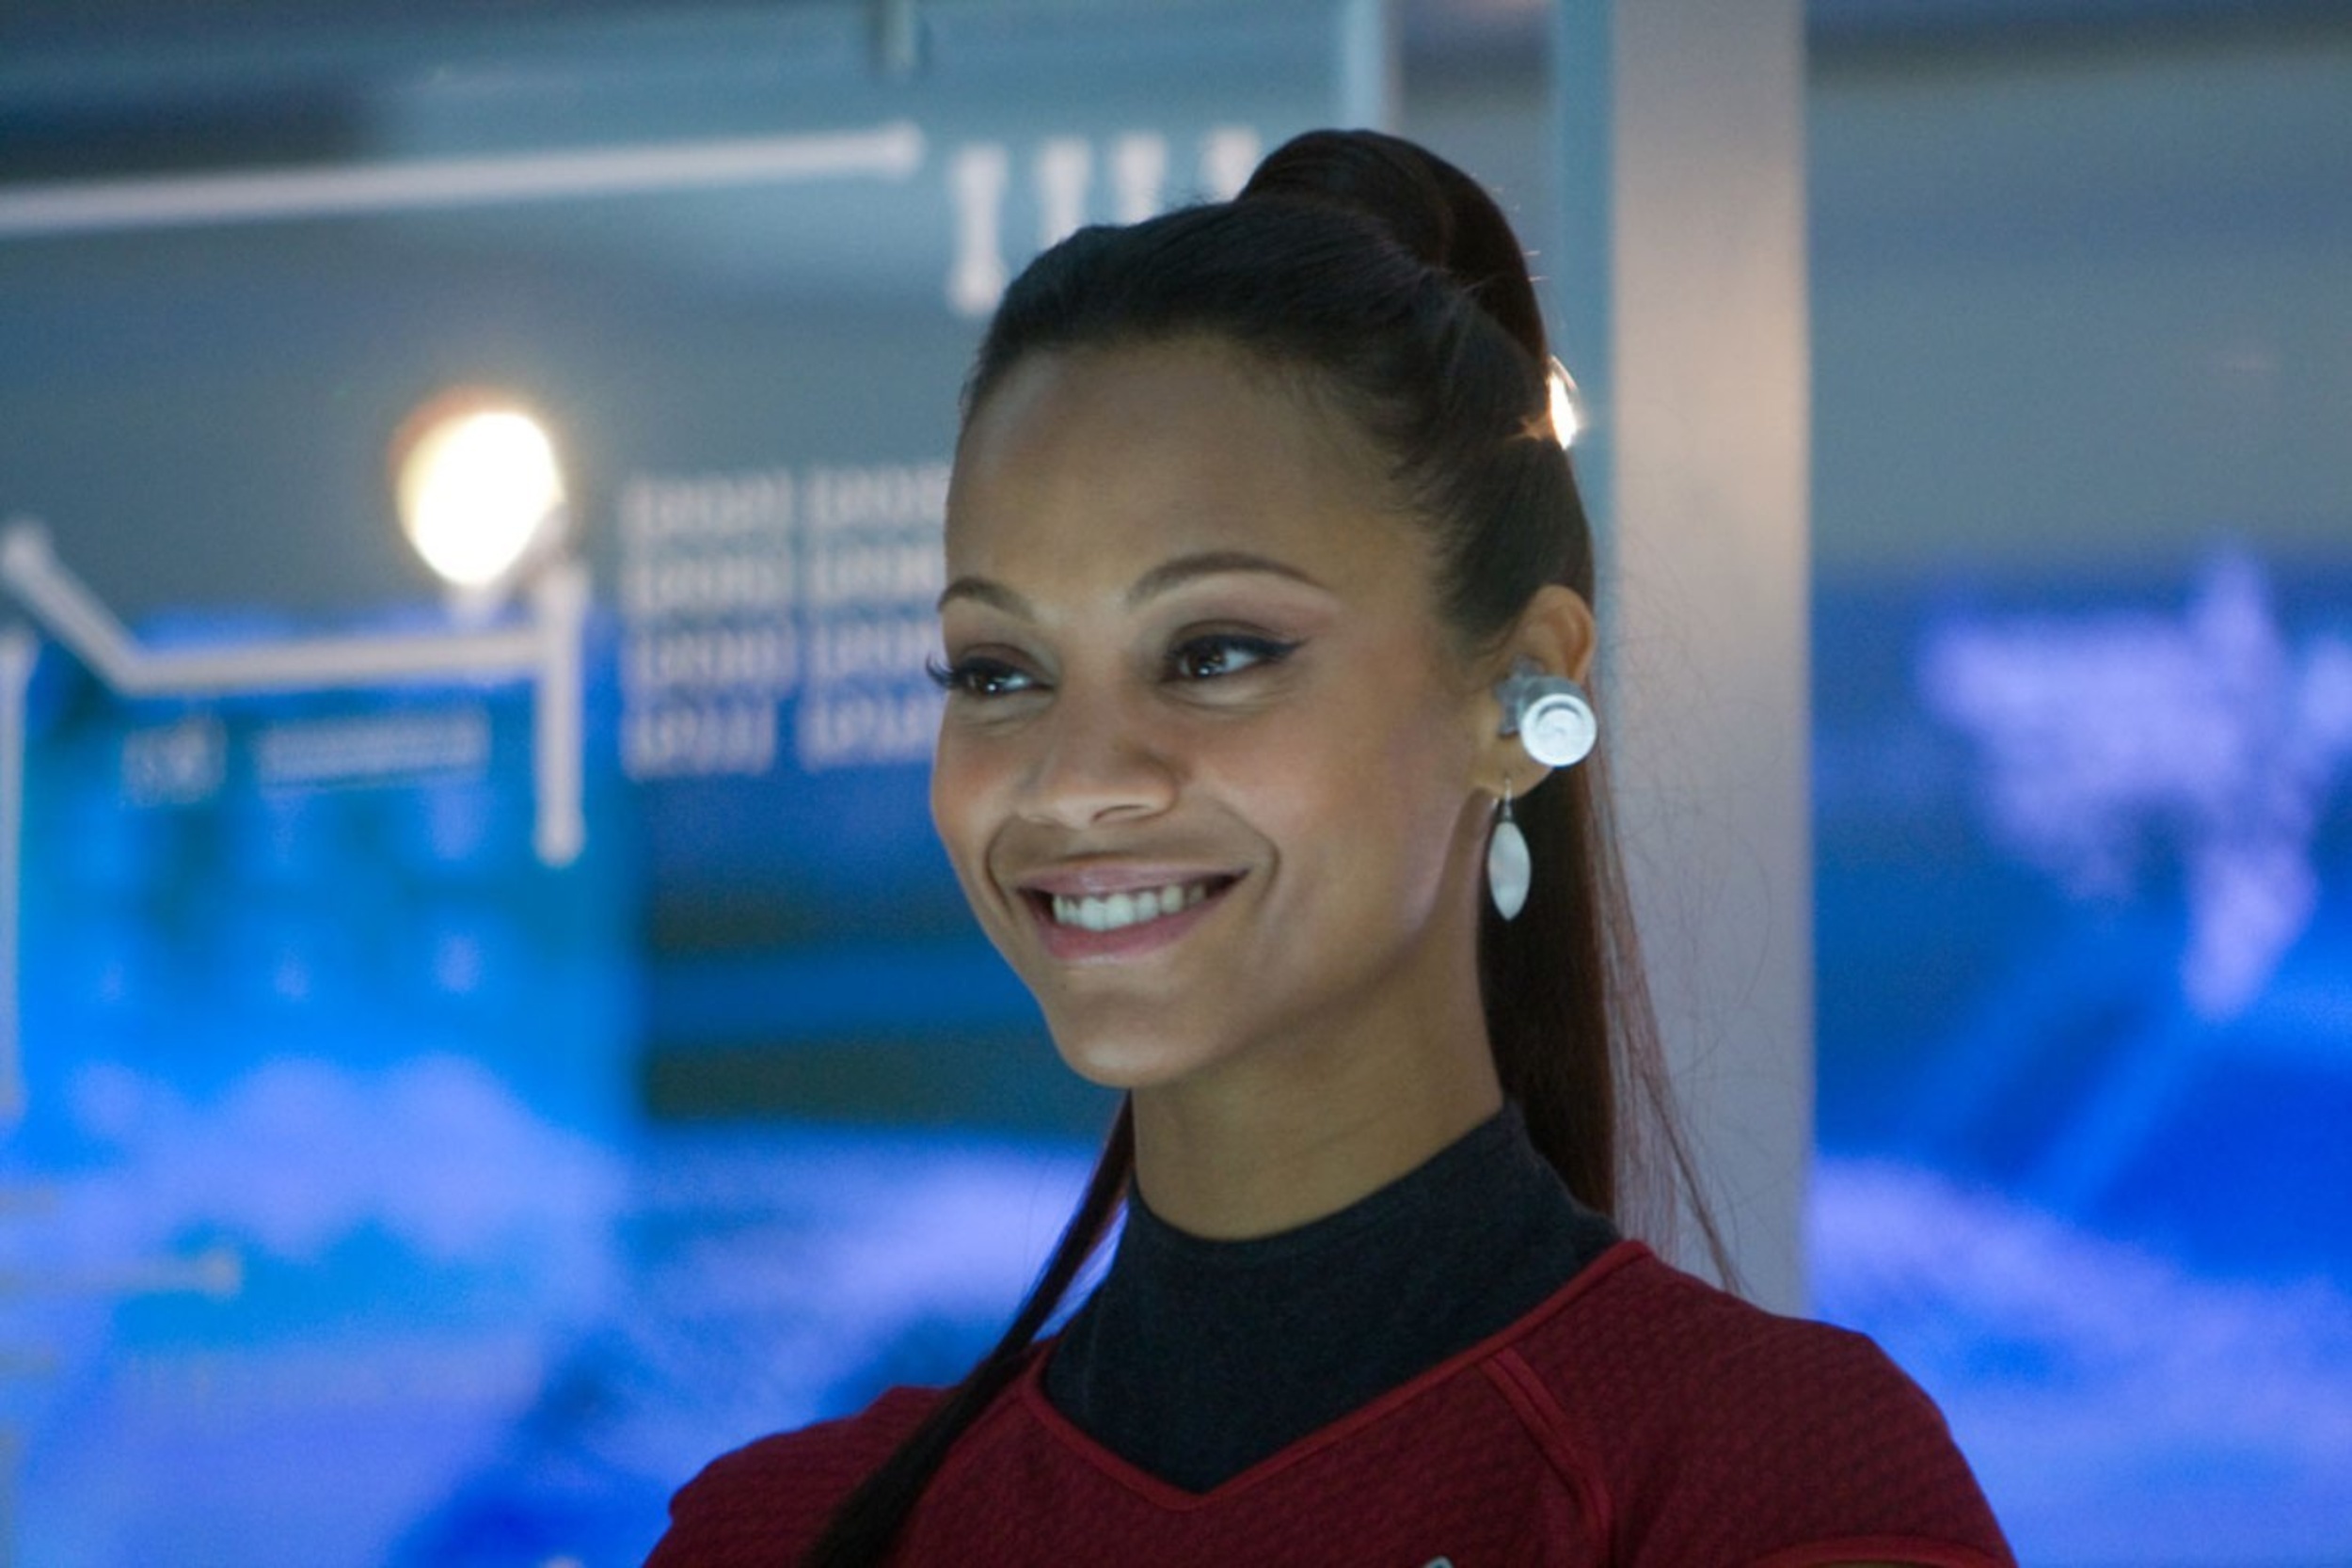 <p>Uhura, played legendarily by Nichelle Nichols, has been around as a character for years. And yet, there was still something new and fundamental to learn about her. In this movie, we learn Uhura’s first name for the first time. It’s Nyota.</p>